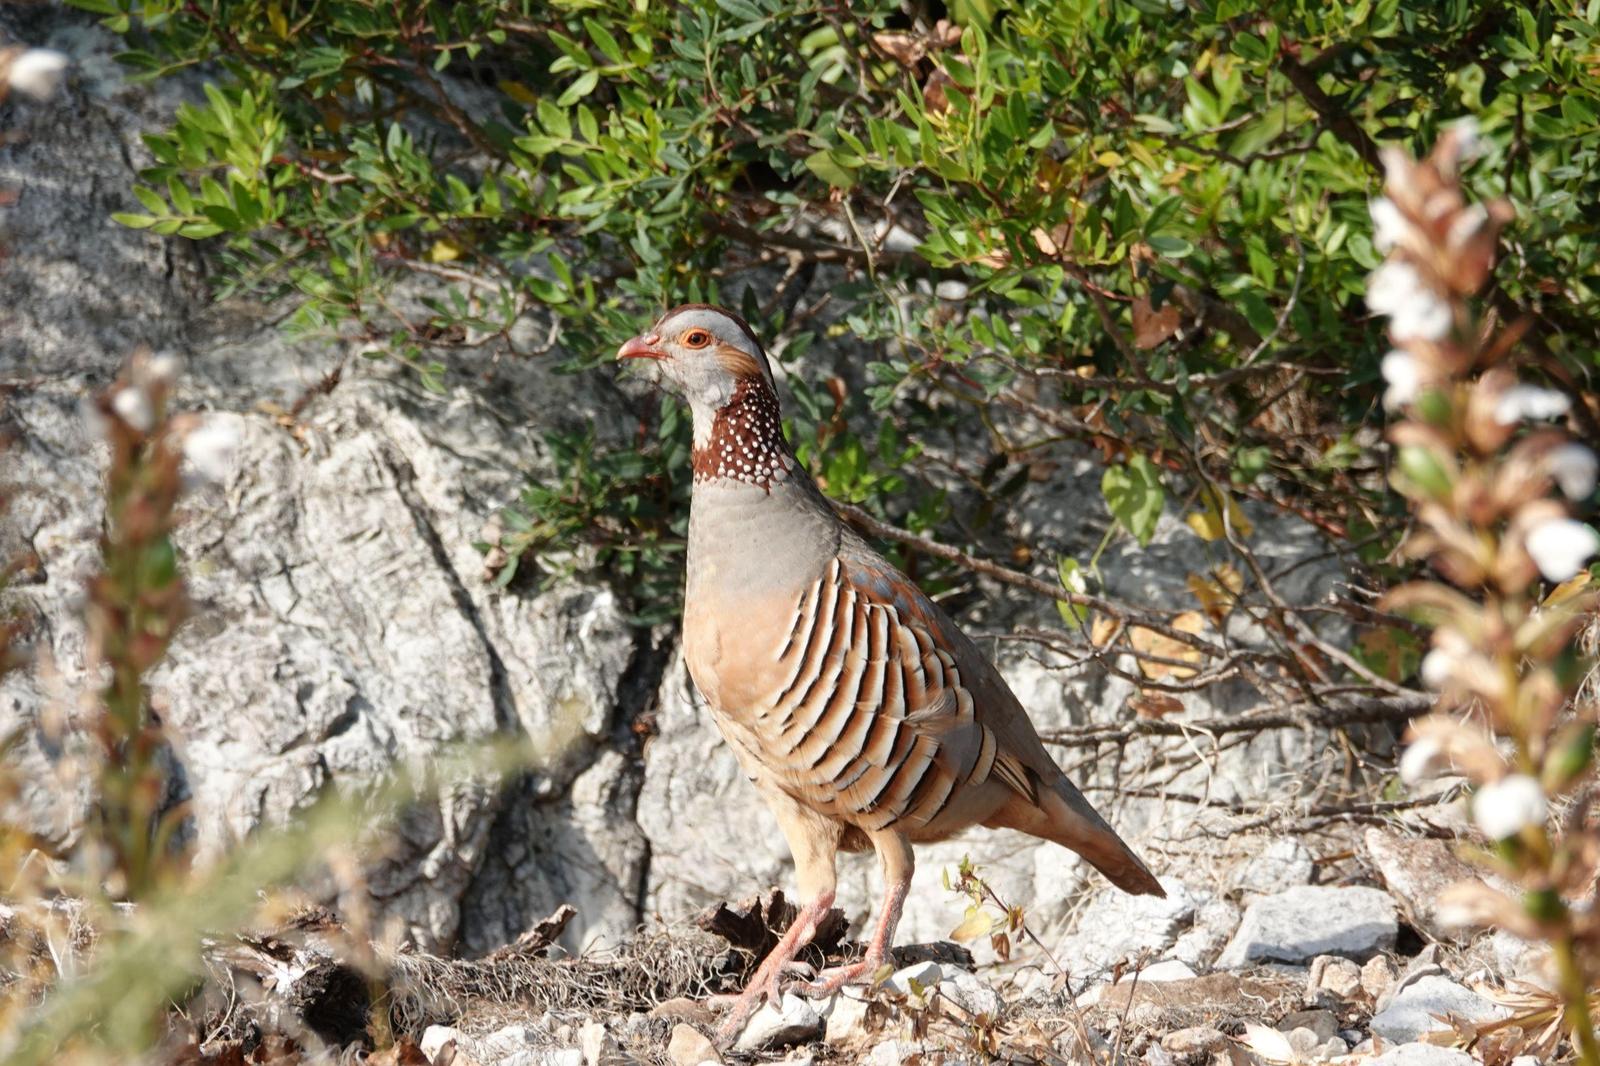 Barbary Partridge Photo by Bonnie Clarfield-Bylin